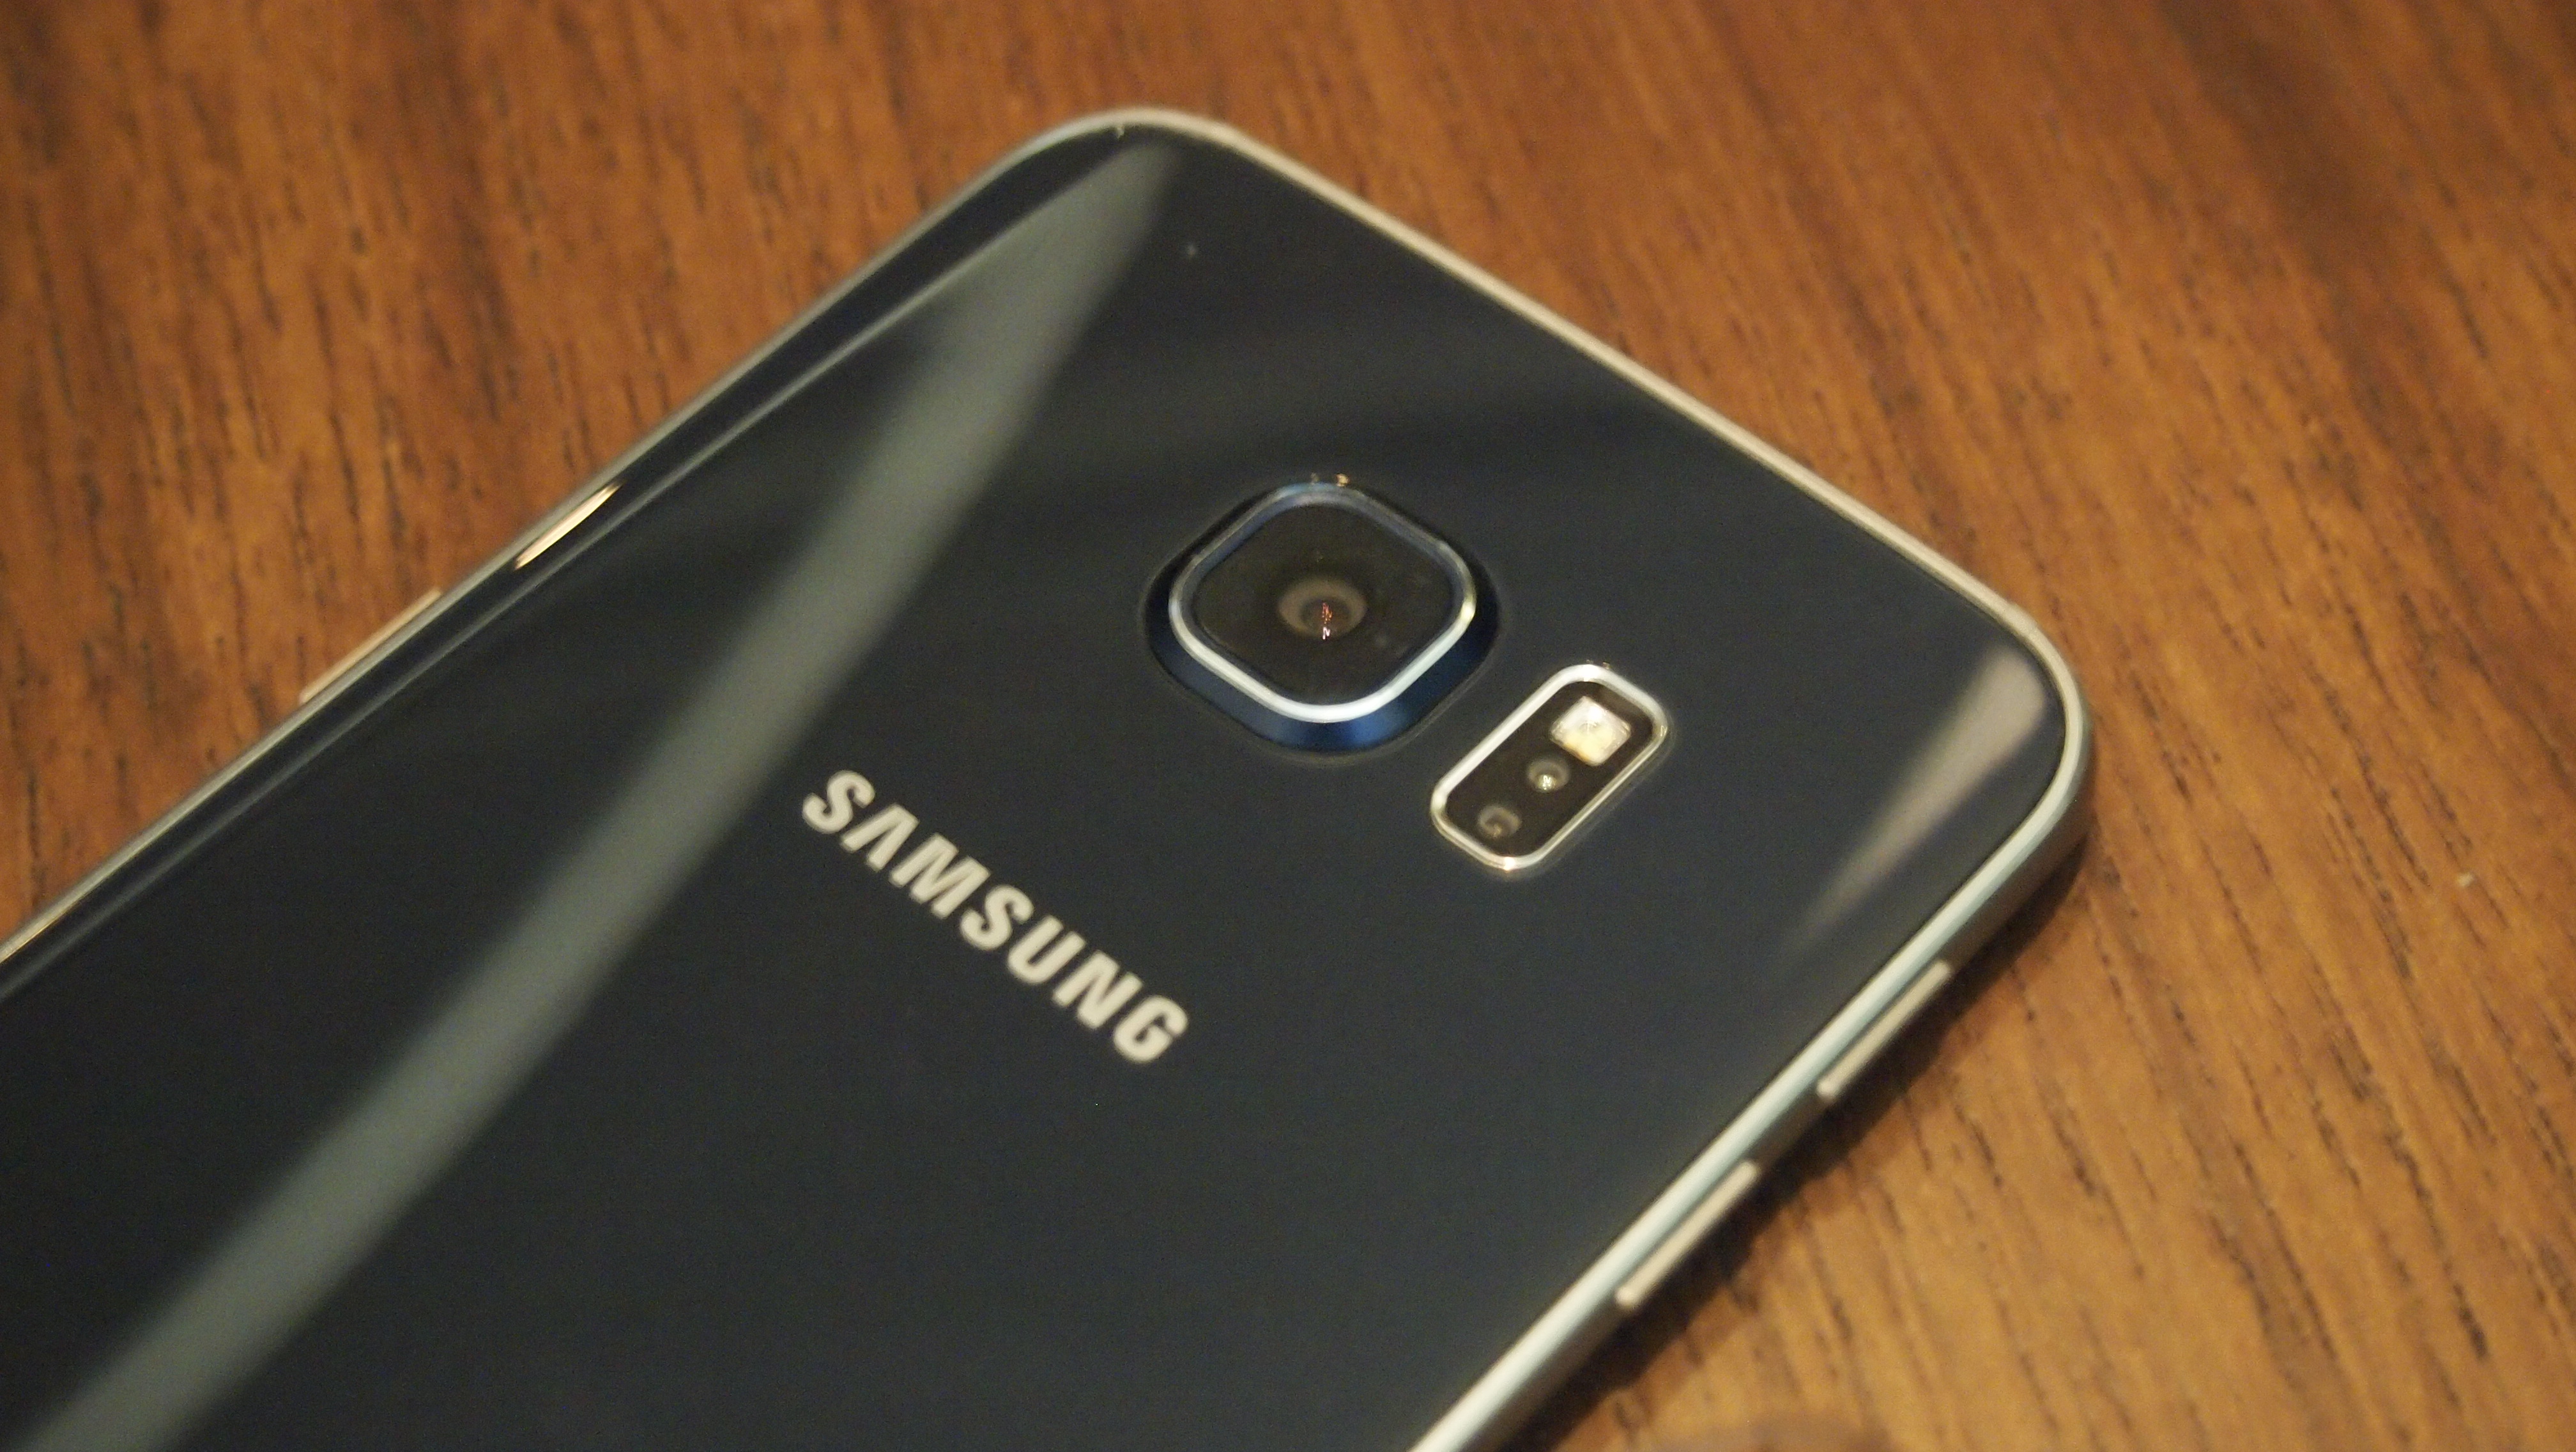 Samsung Galaxy S6 ycptech hands on